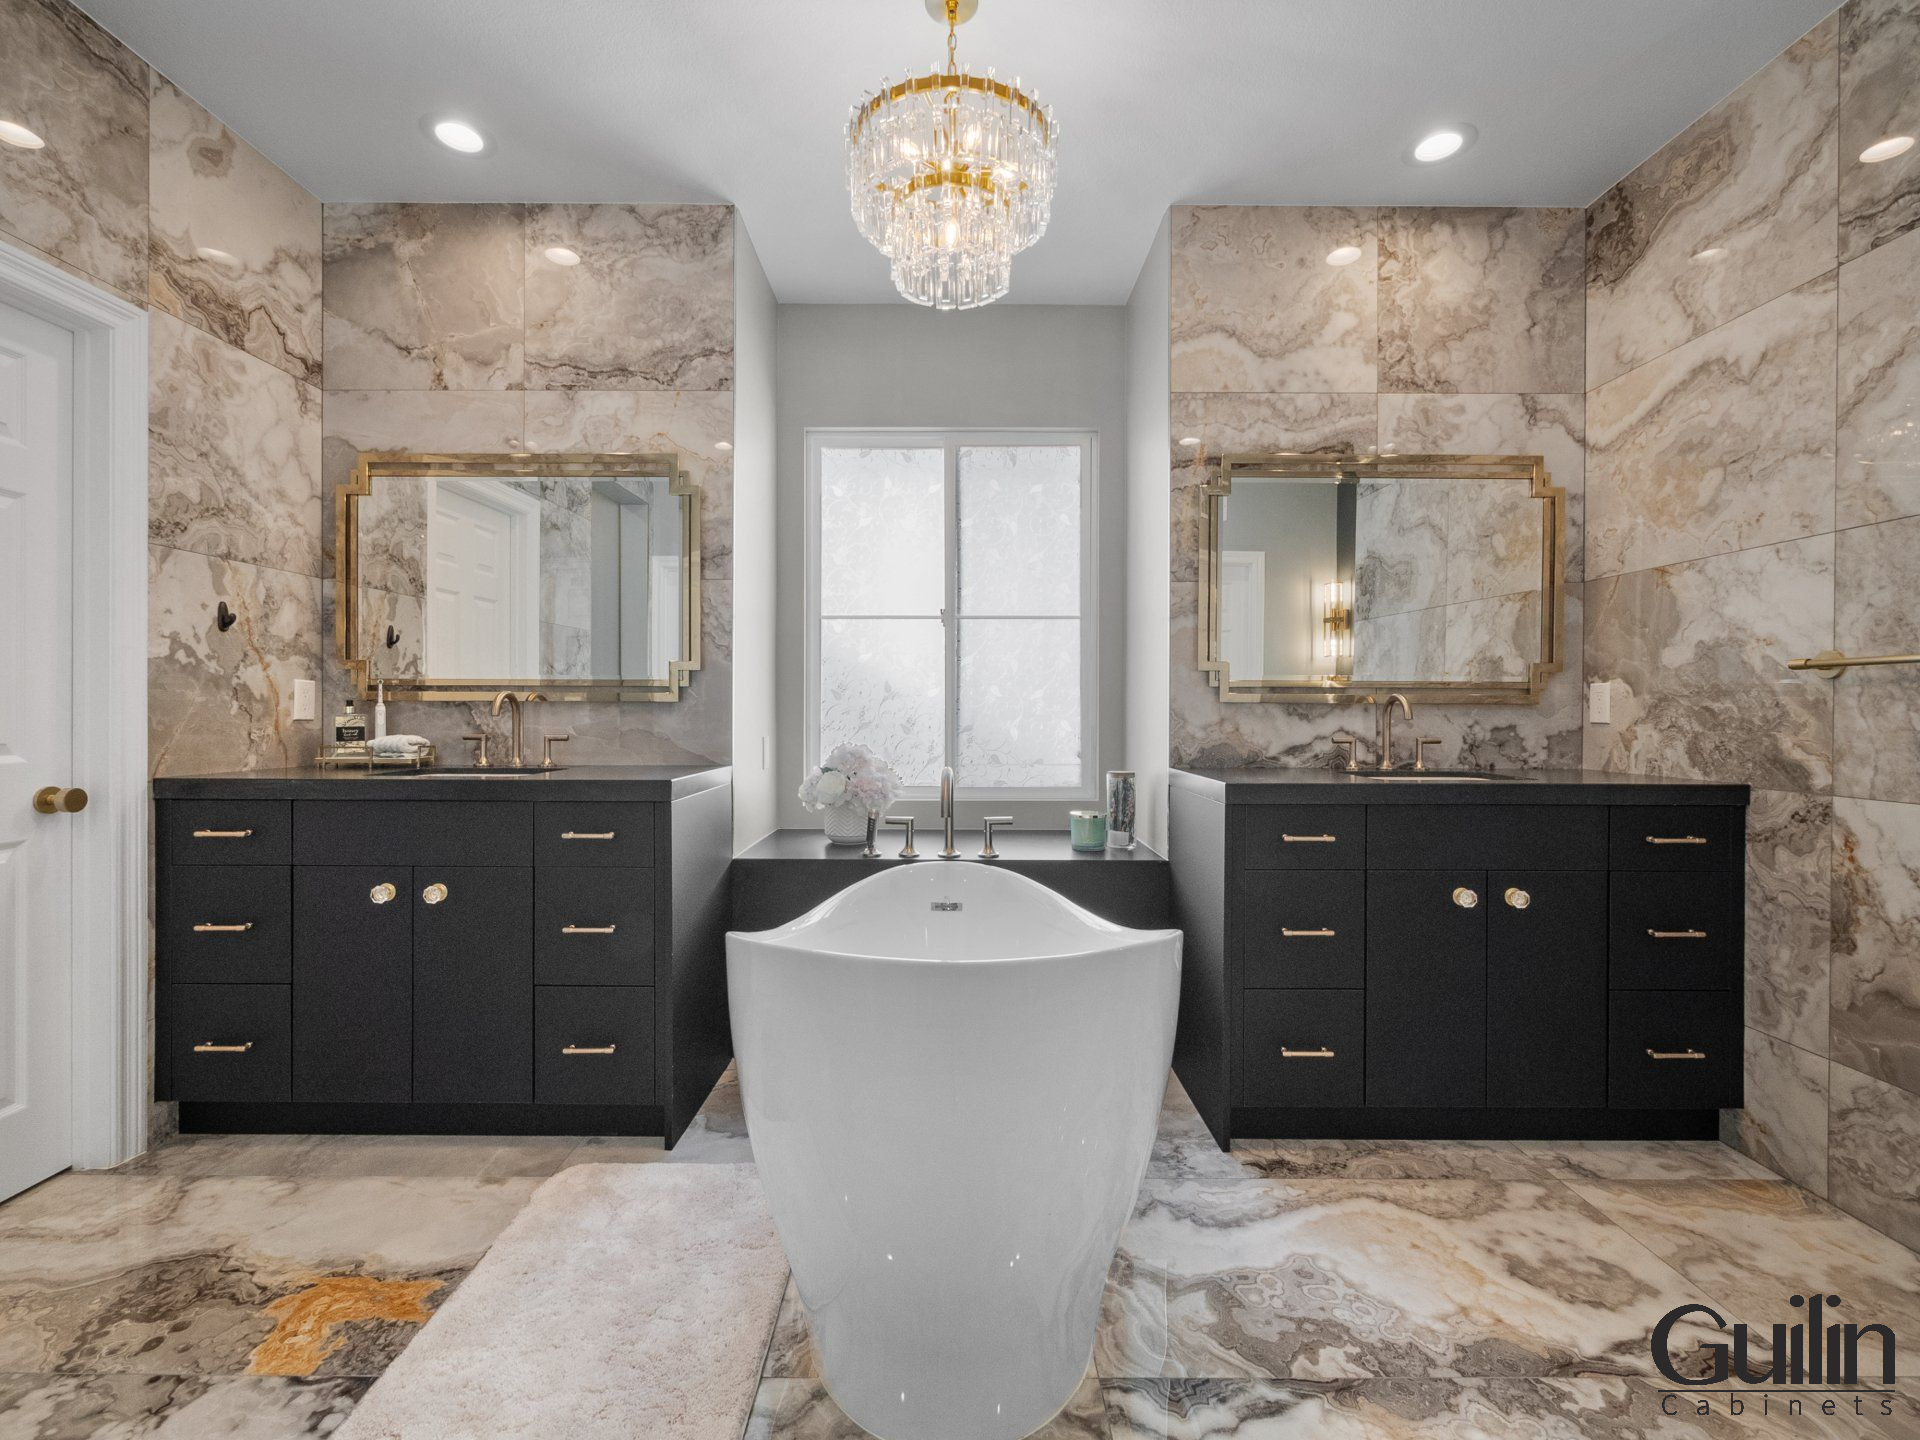 A Master Bathroom is a large bathroom in a house that is typically attached to the master bedroom.